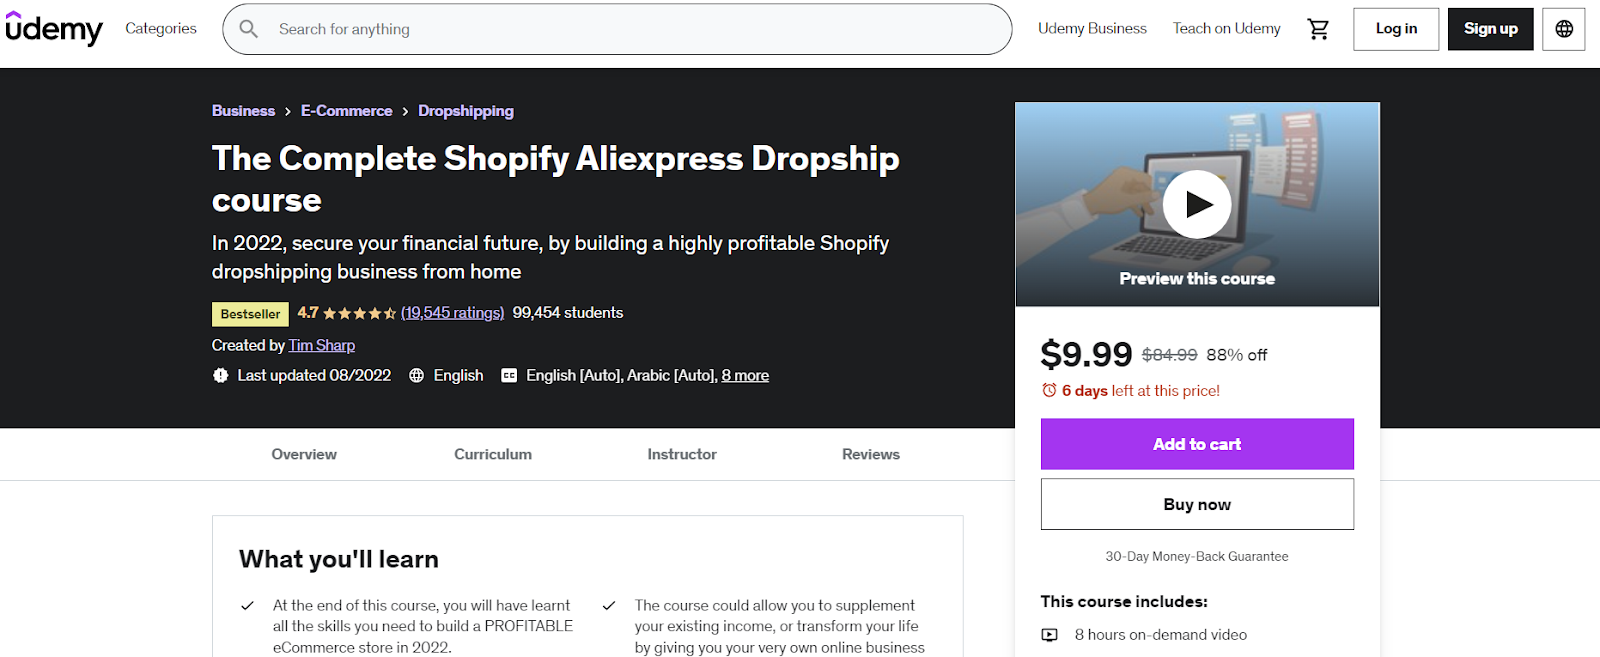 The Complete Shopify Aliexpress Dropship Course